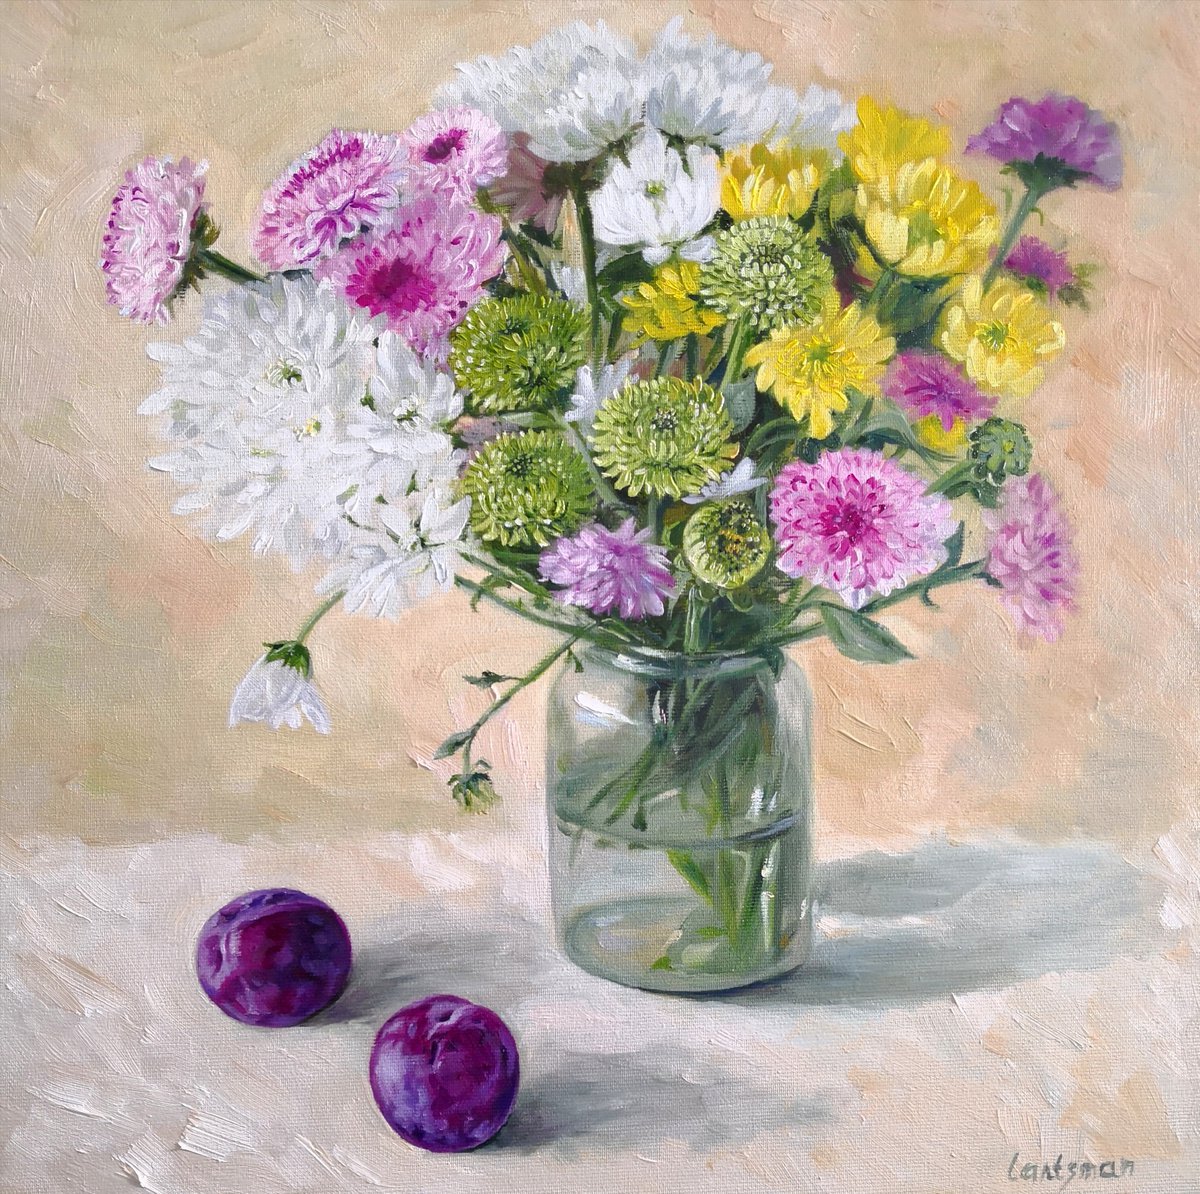 Asters flower bouquet in a glass jar with pulms aside still life by Jane Lantsman